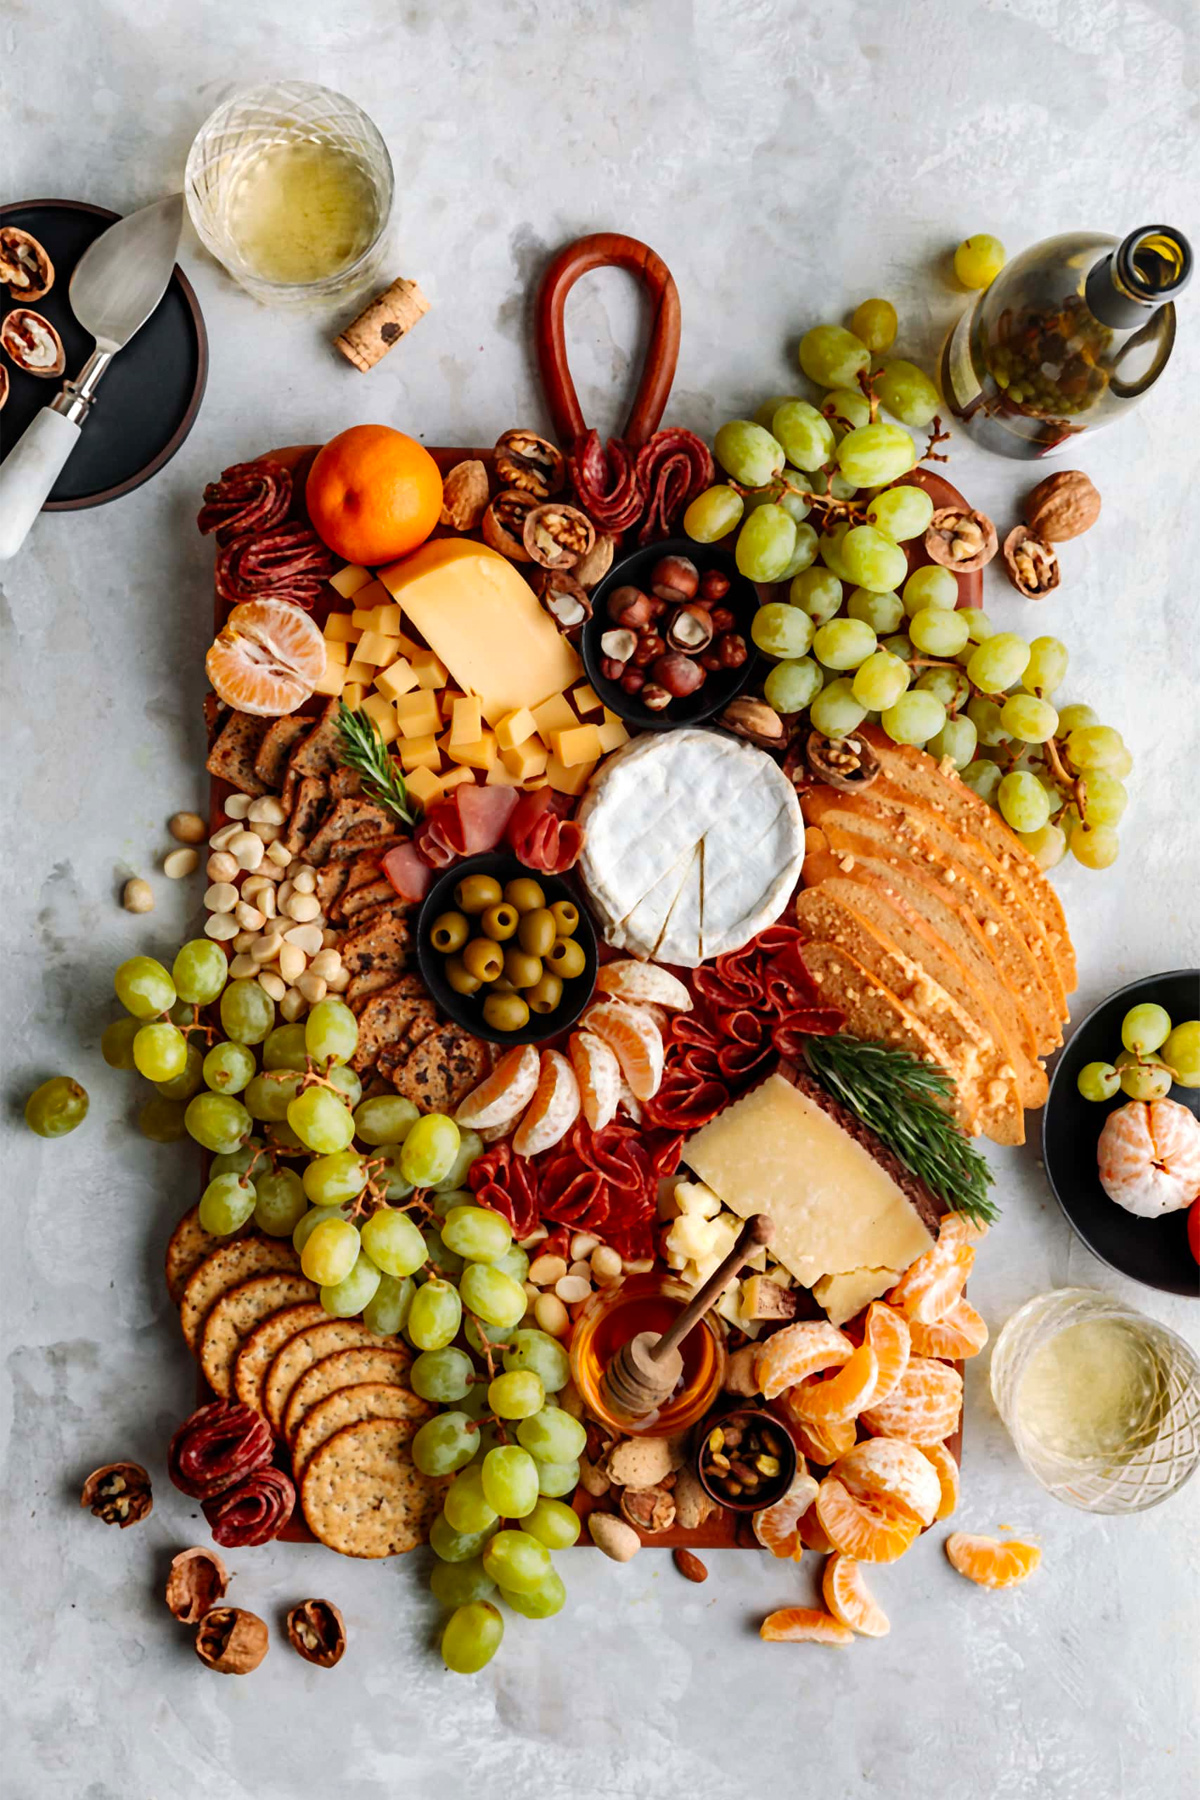 Yoga of Cooking's charcuterie board features an array of hard and soft cheeses, seasonal fruits like clementines, and a touch of fresh rosemary sprigs